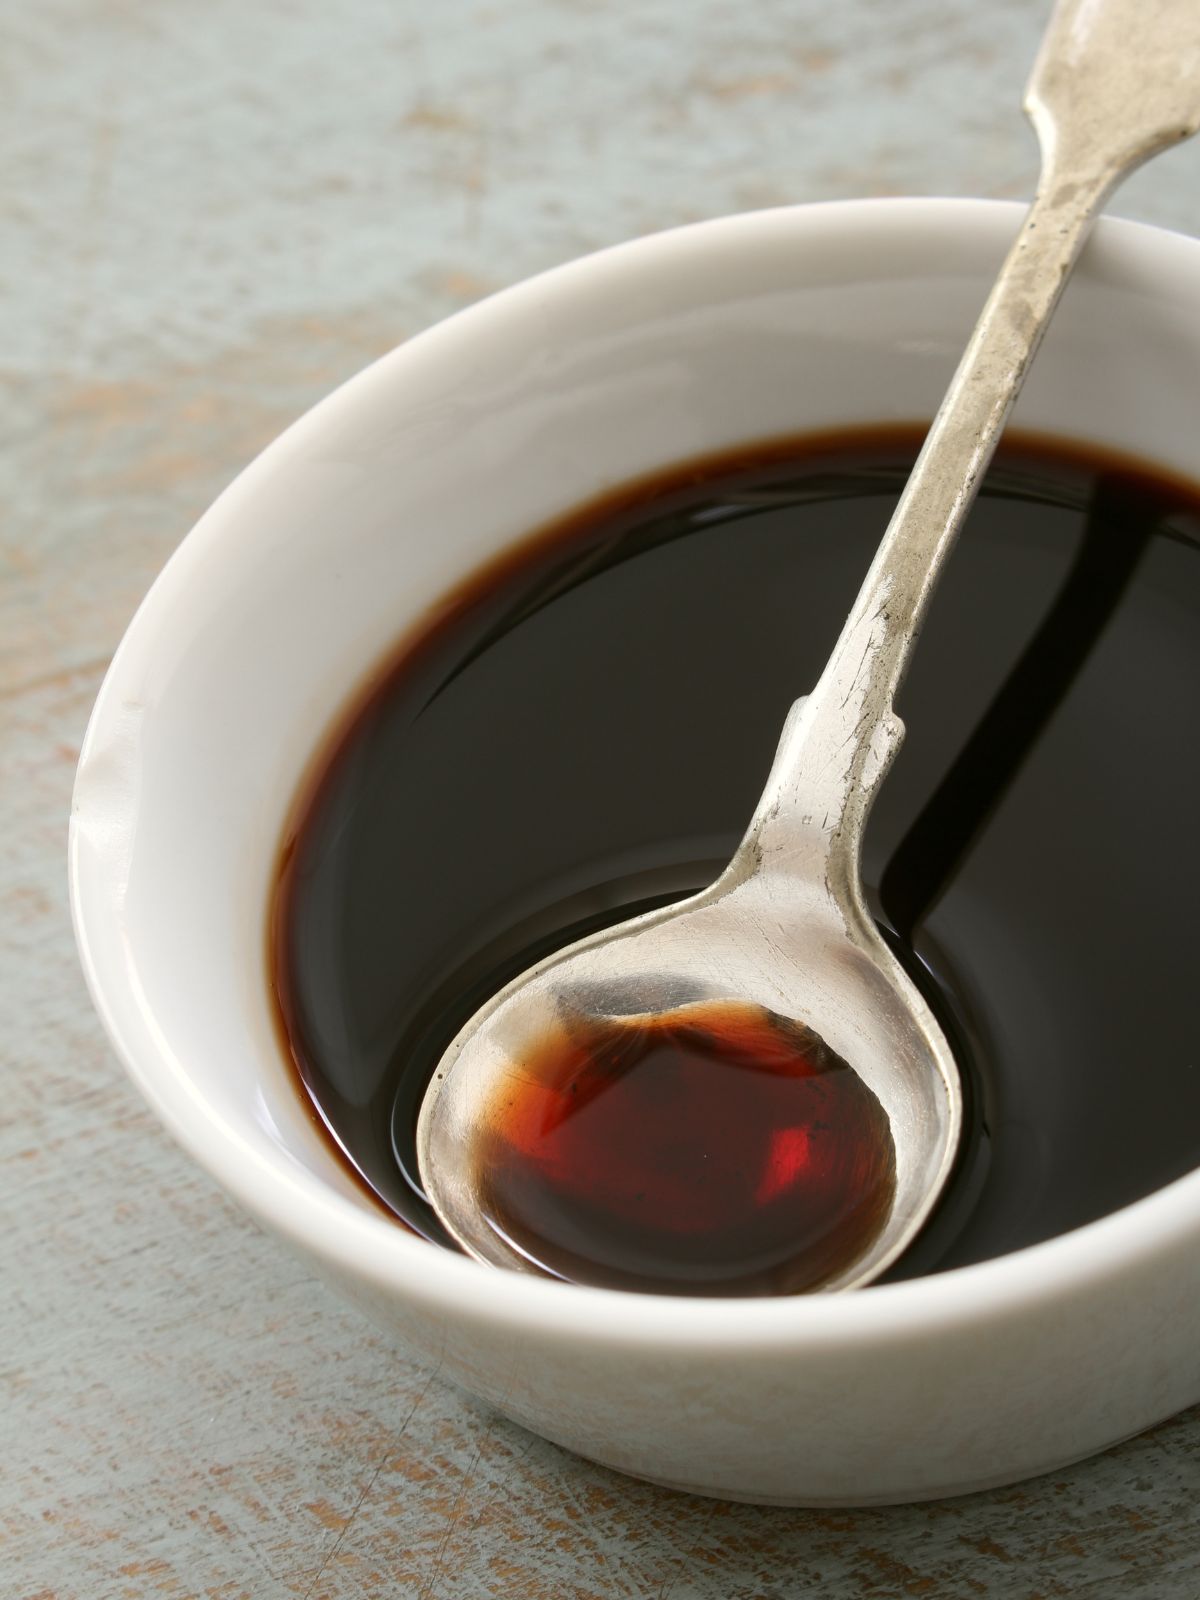 white bowl of balsamic vinegar with a spoon in it.